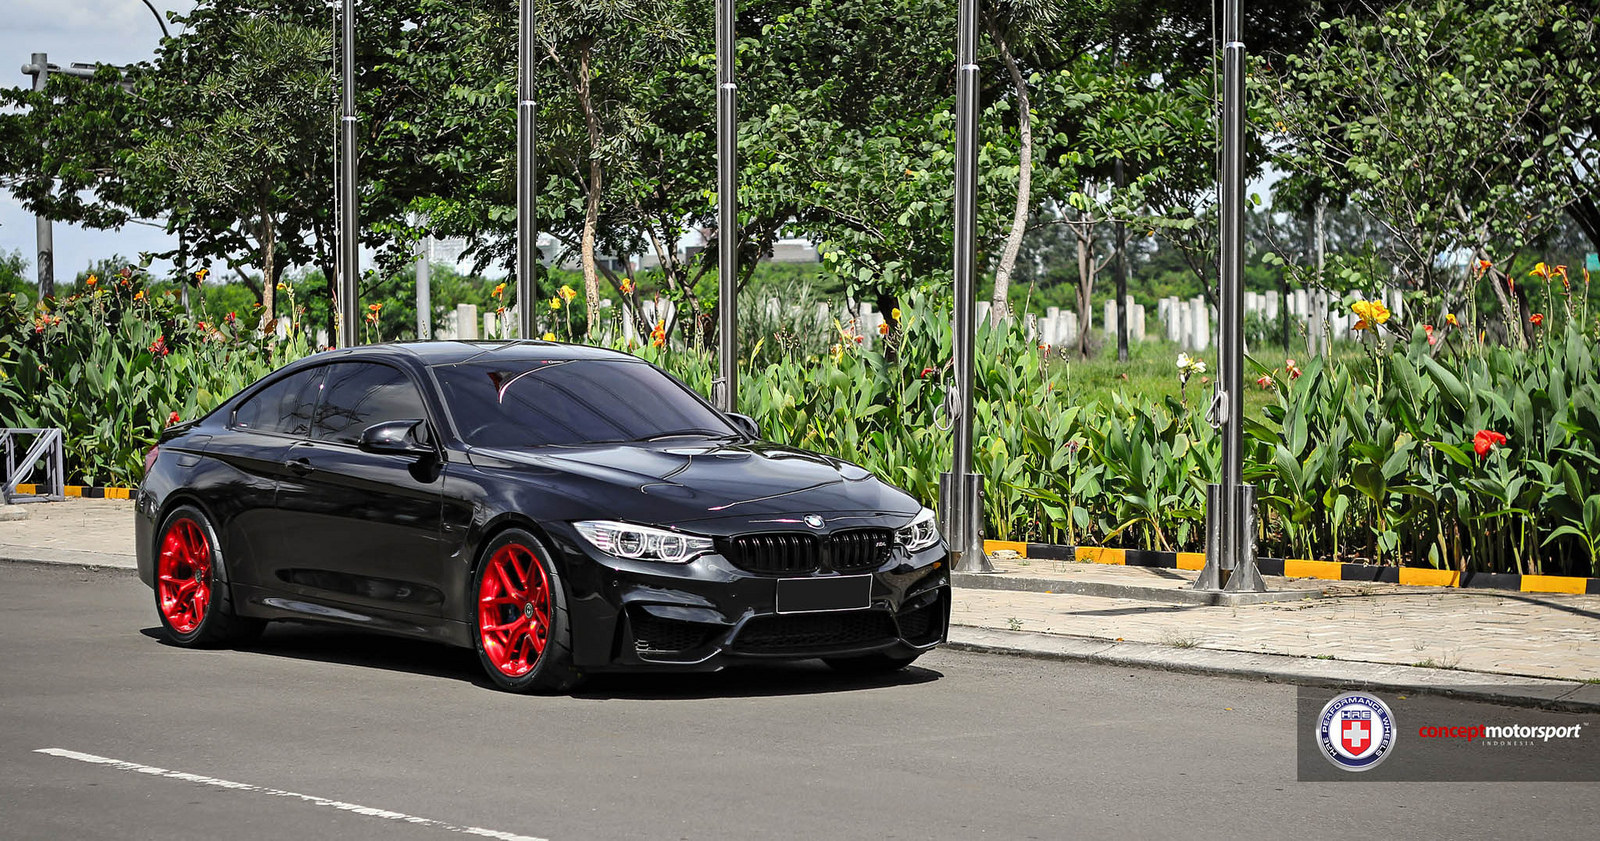 Black Sapphire F82 BMW M4 Looks Astonishing with Red HRE Wheels